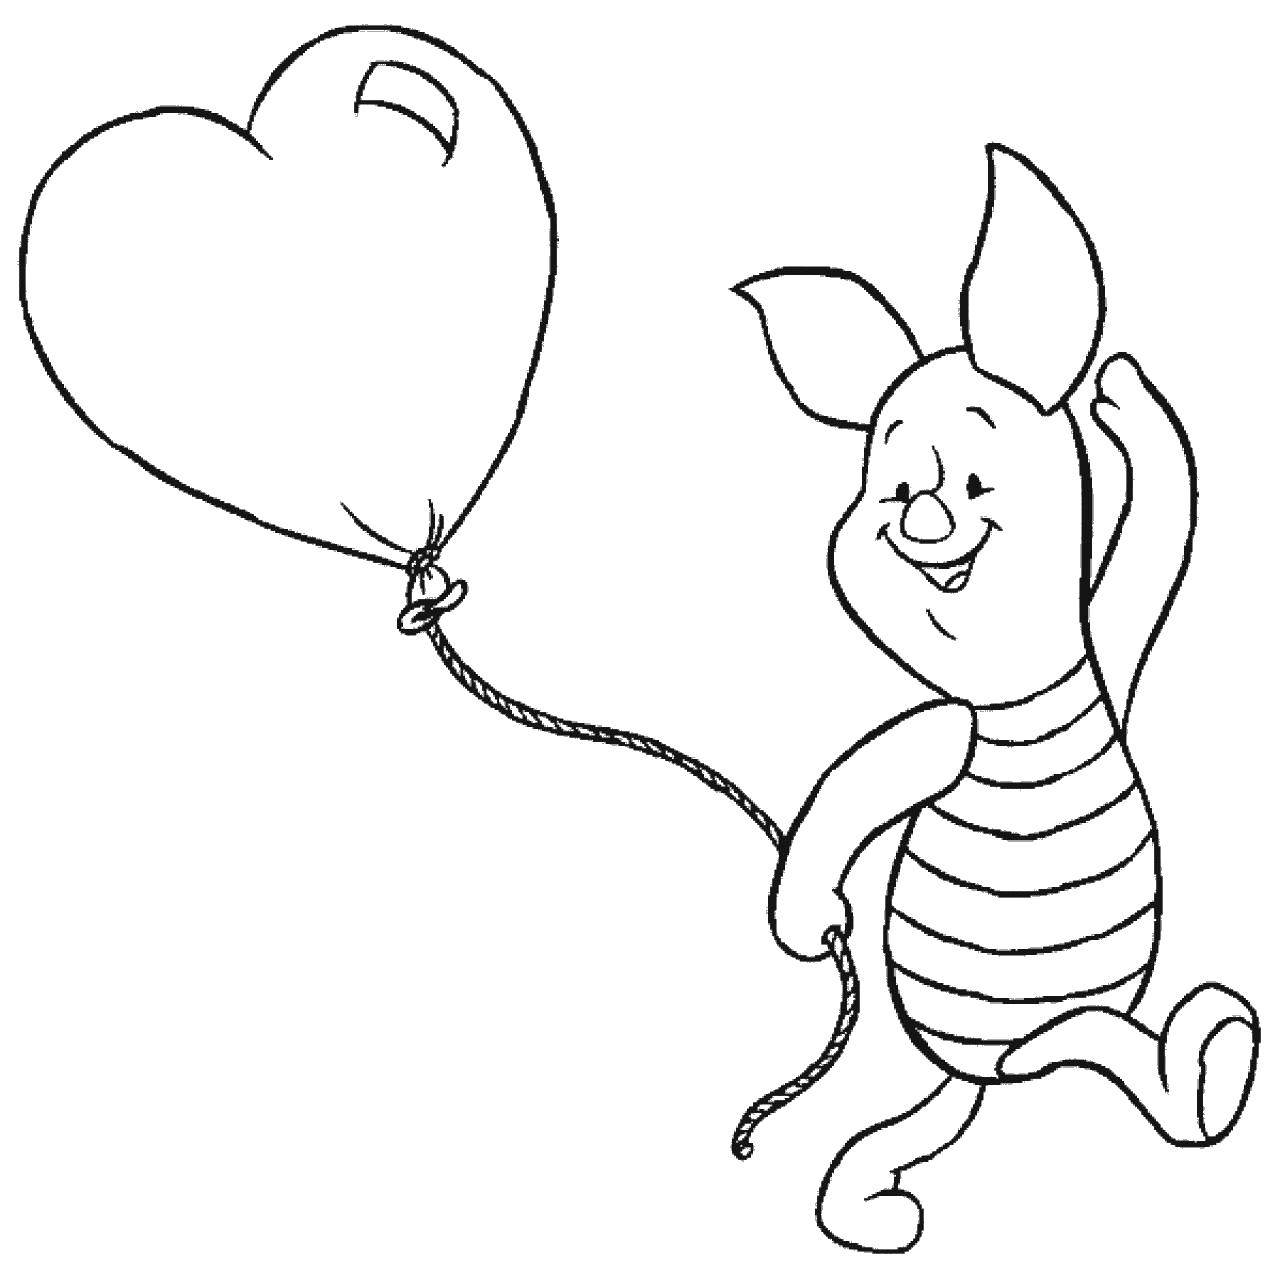 Coloring Pig heels with the ball. Category Disney coloring pages. Tags:  Disney cartoons, Winnie the Pooh, Piglet.